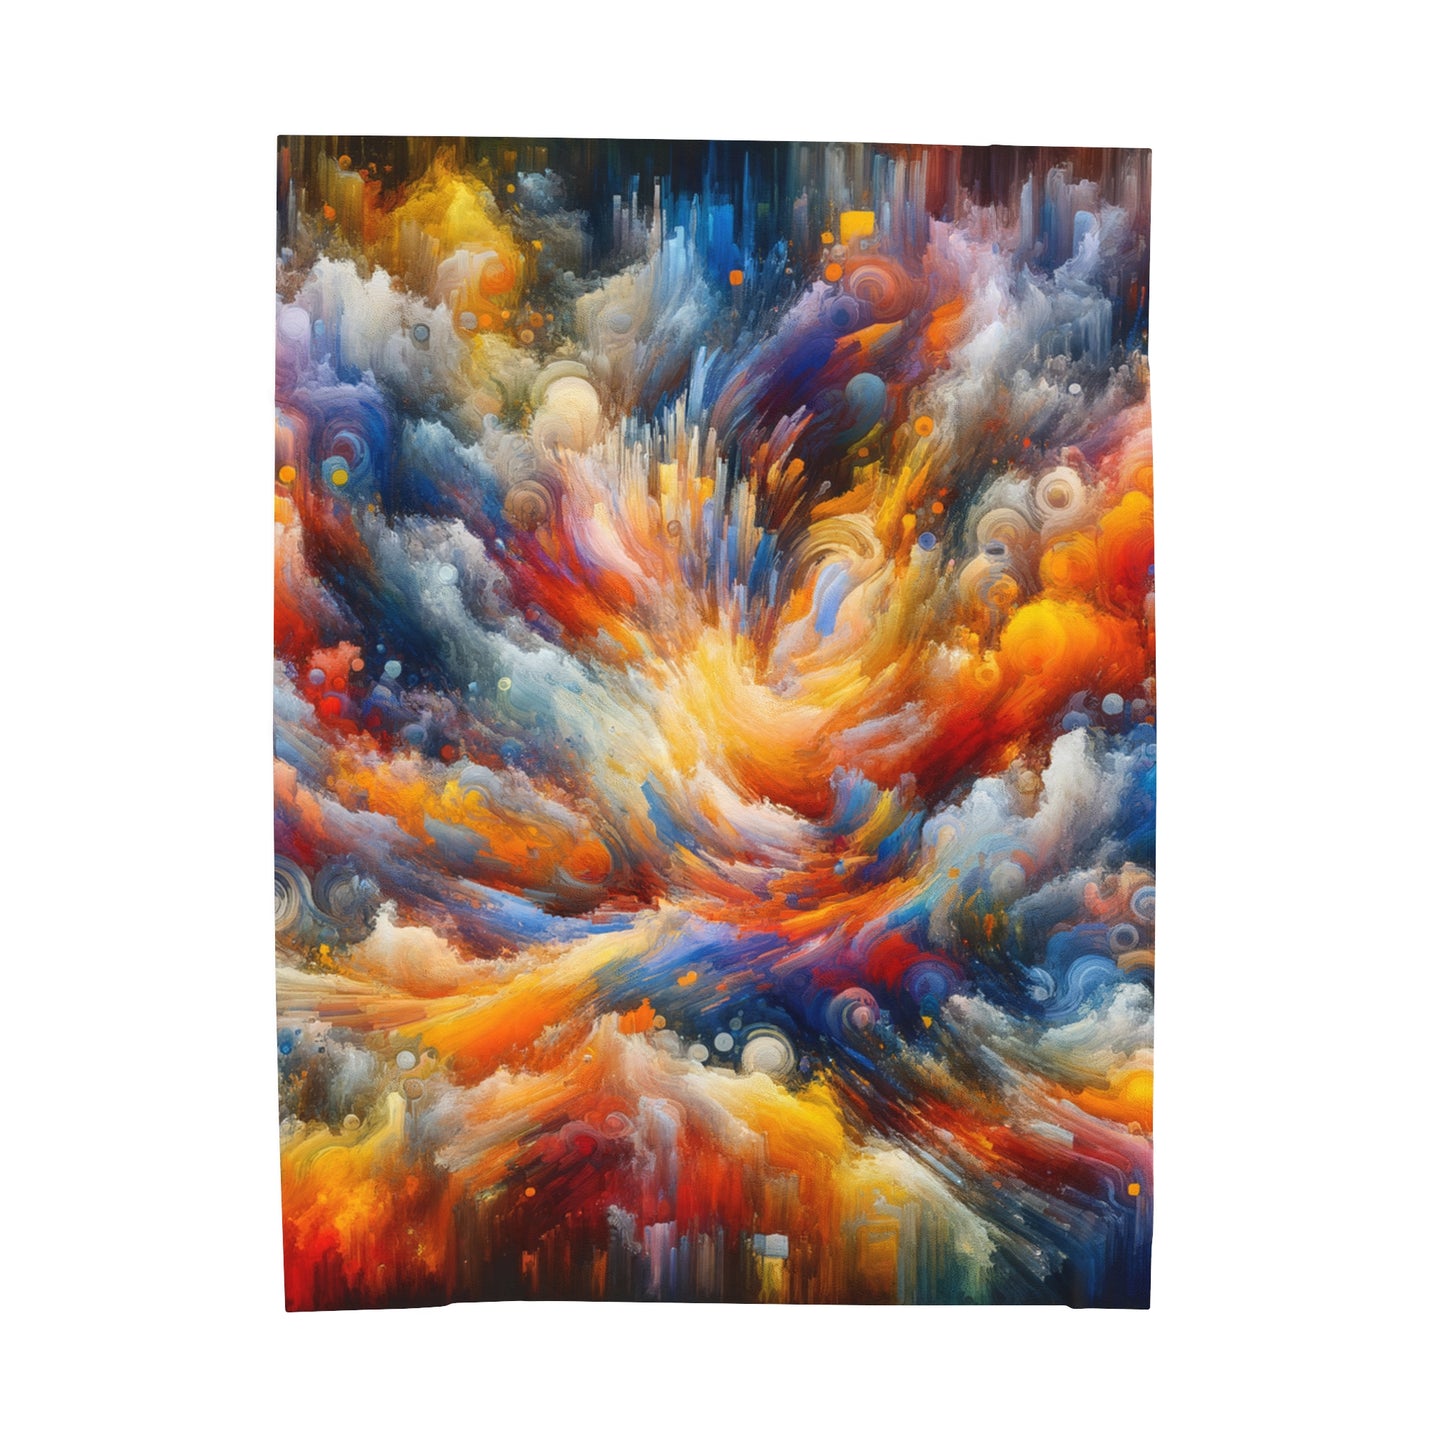 "Vibrant Chaos". - The Alien Velveteen Plush Blanket Abstract Expressionism Style